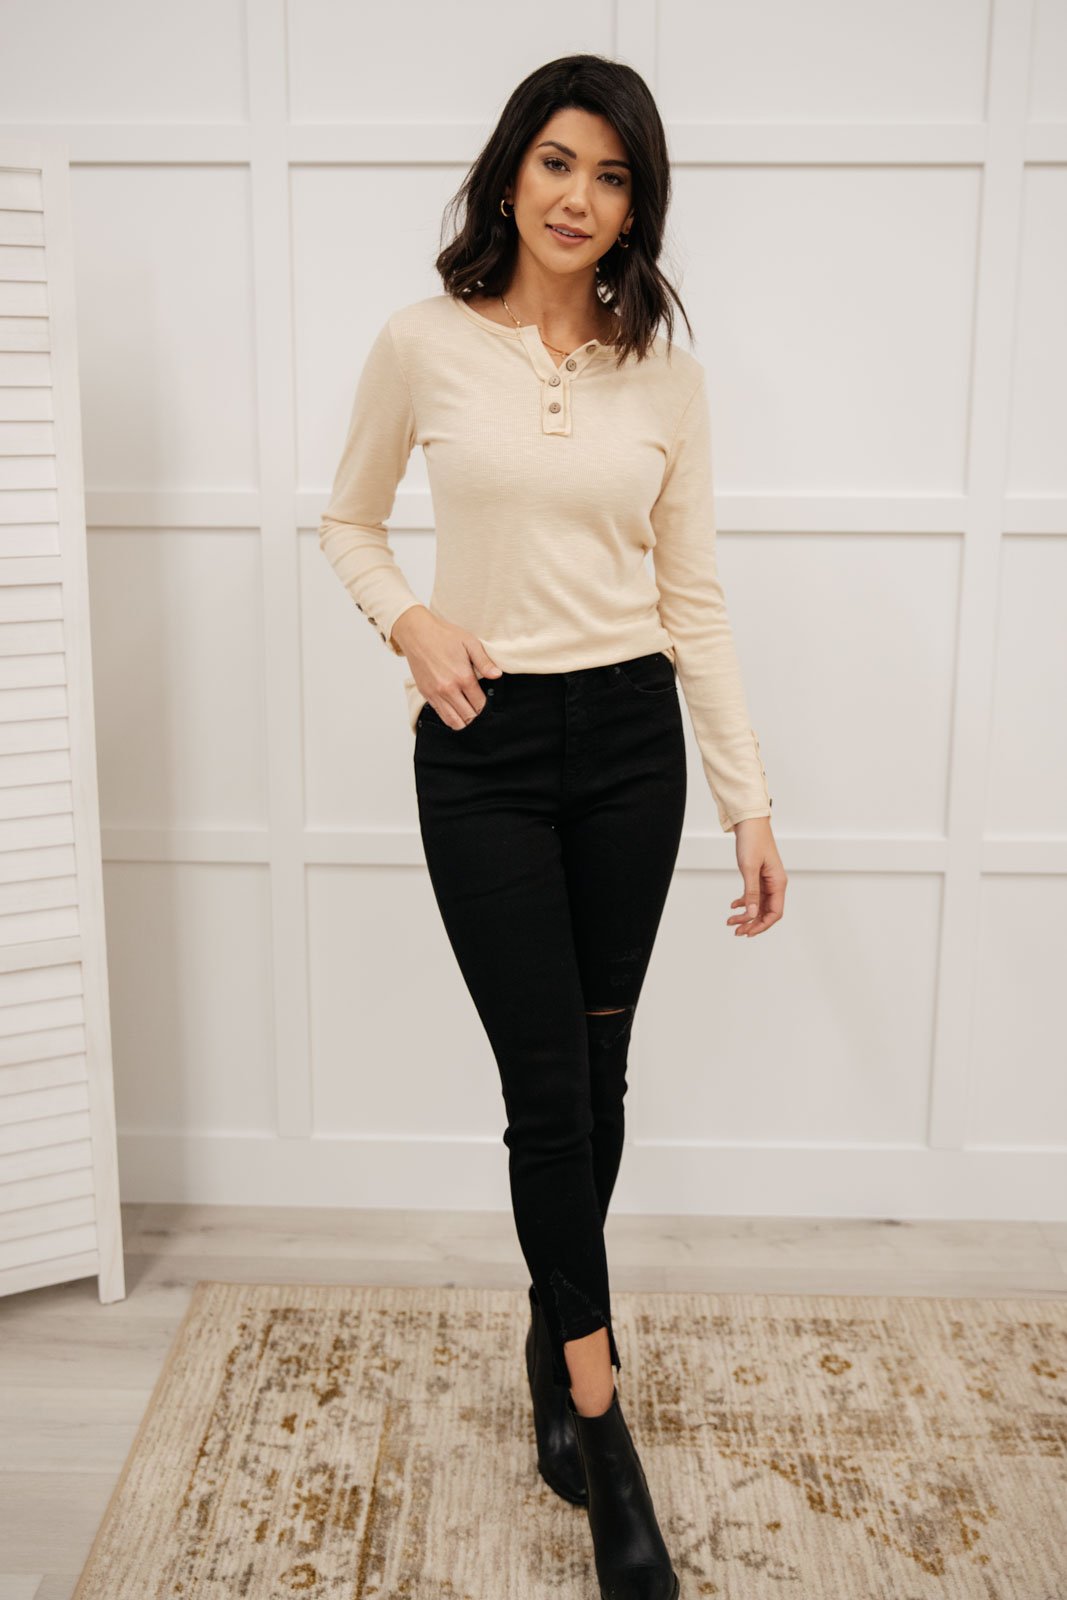 By The Fireplace Thermal Top in Oatmeal (Online Exclusive)